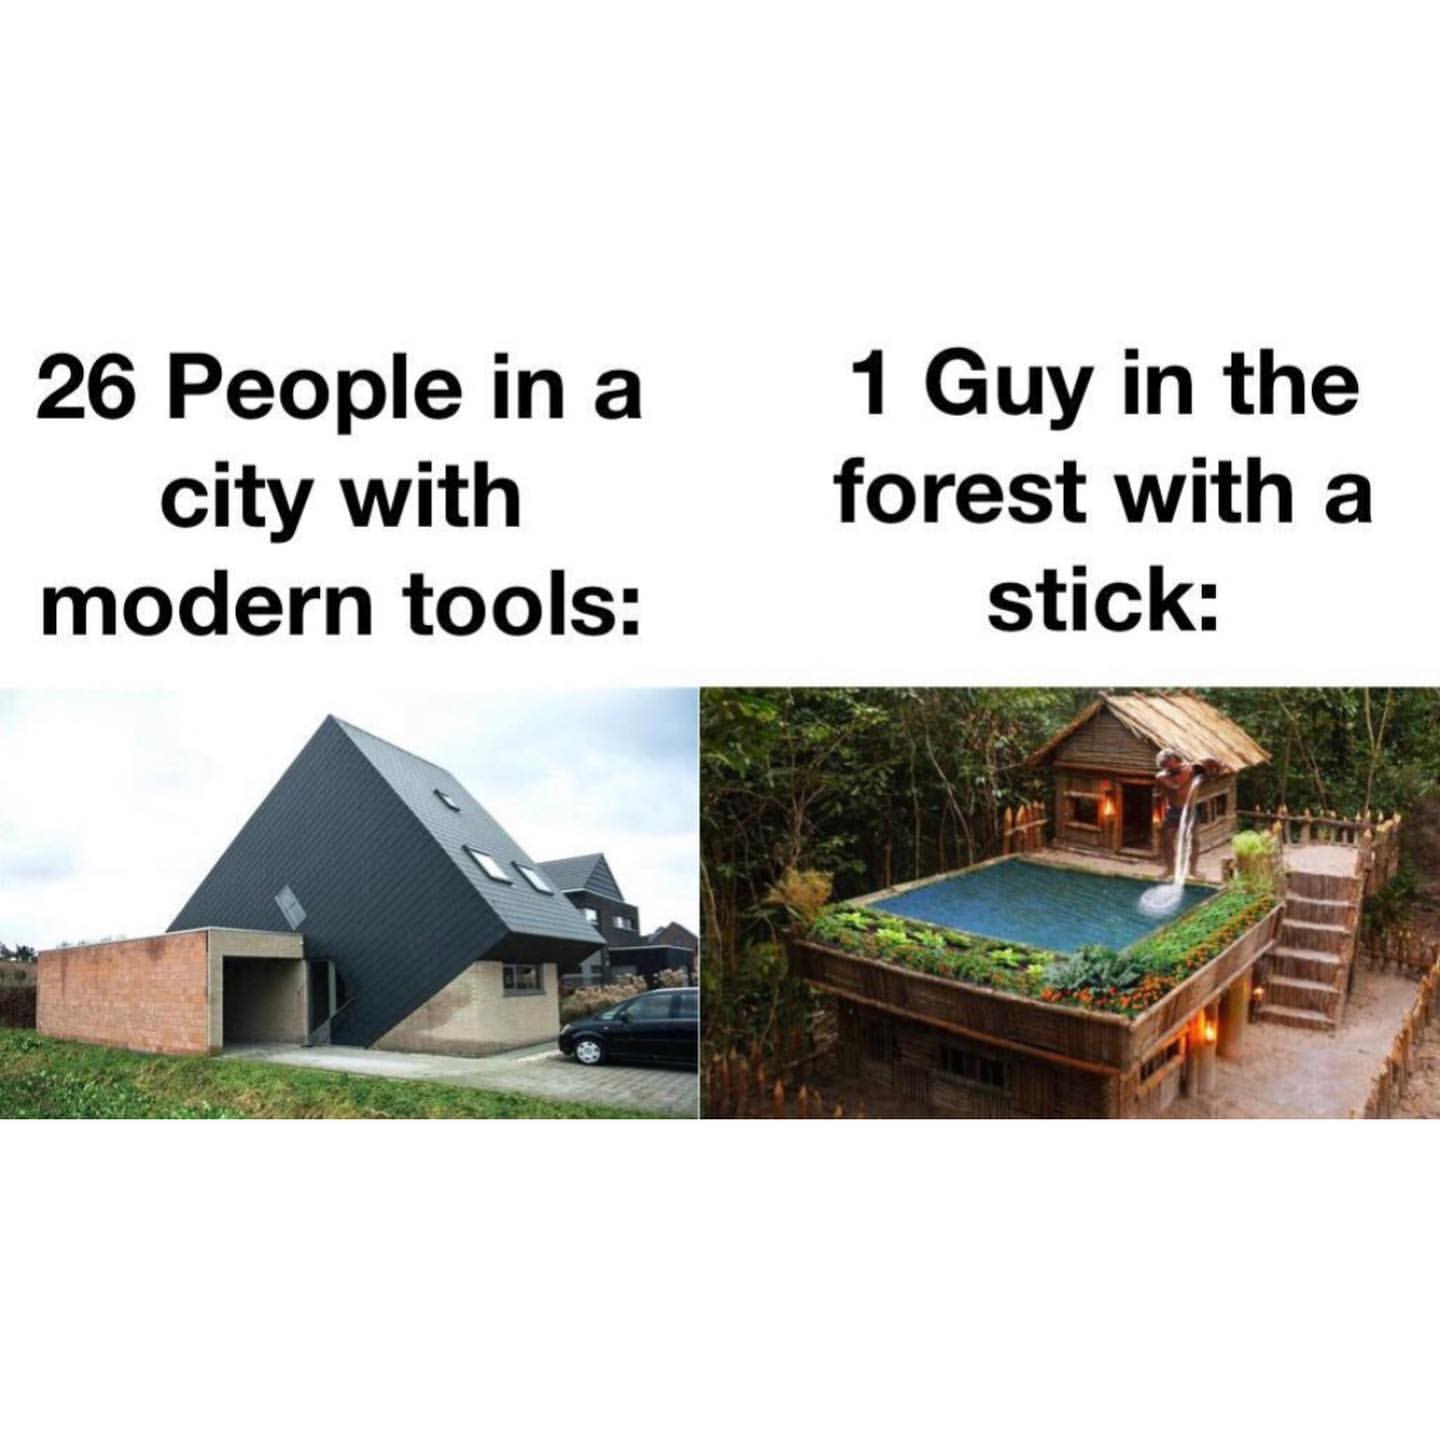 26 People in a city with modern tools: 1 Guy in the forest with a stick